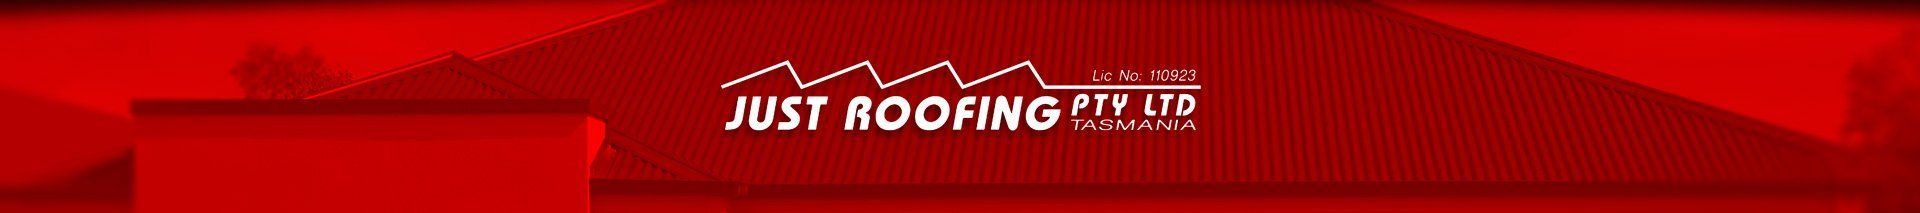 Roofing by Just Roofing